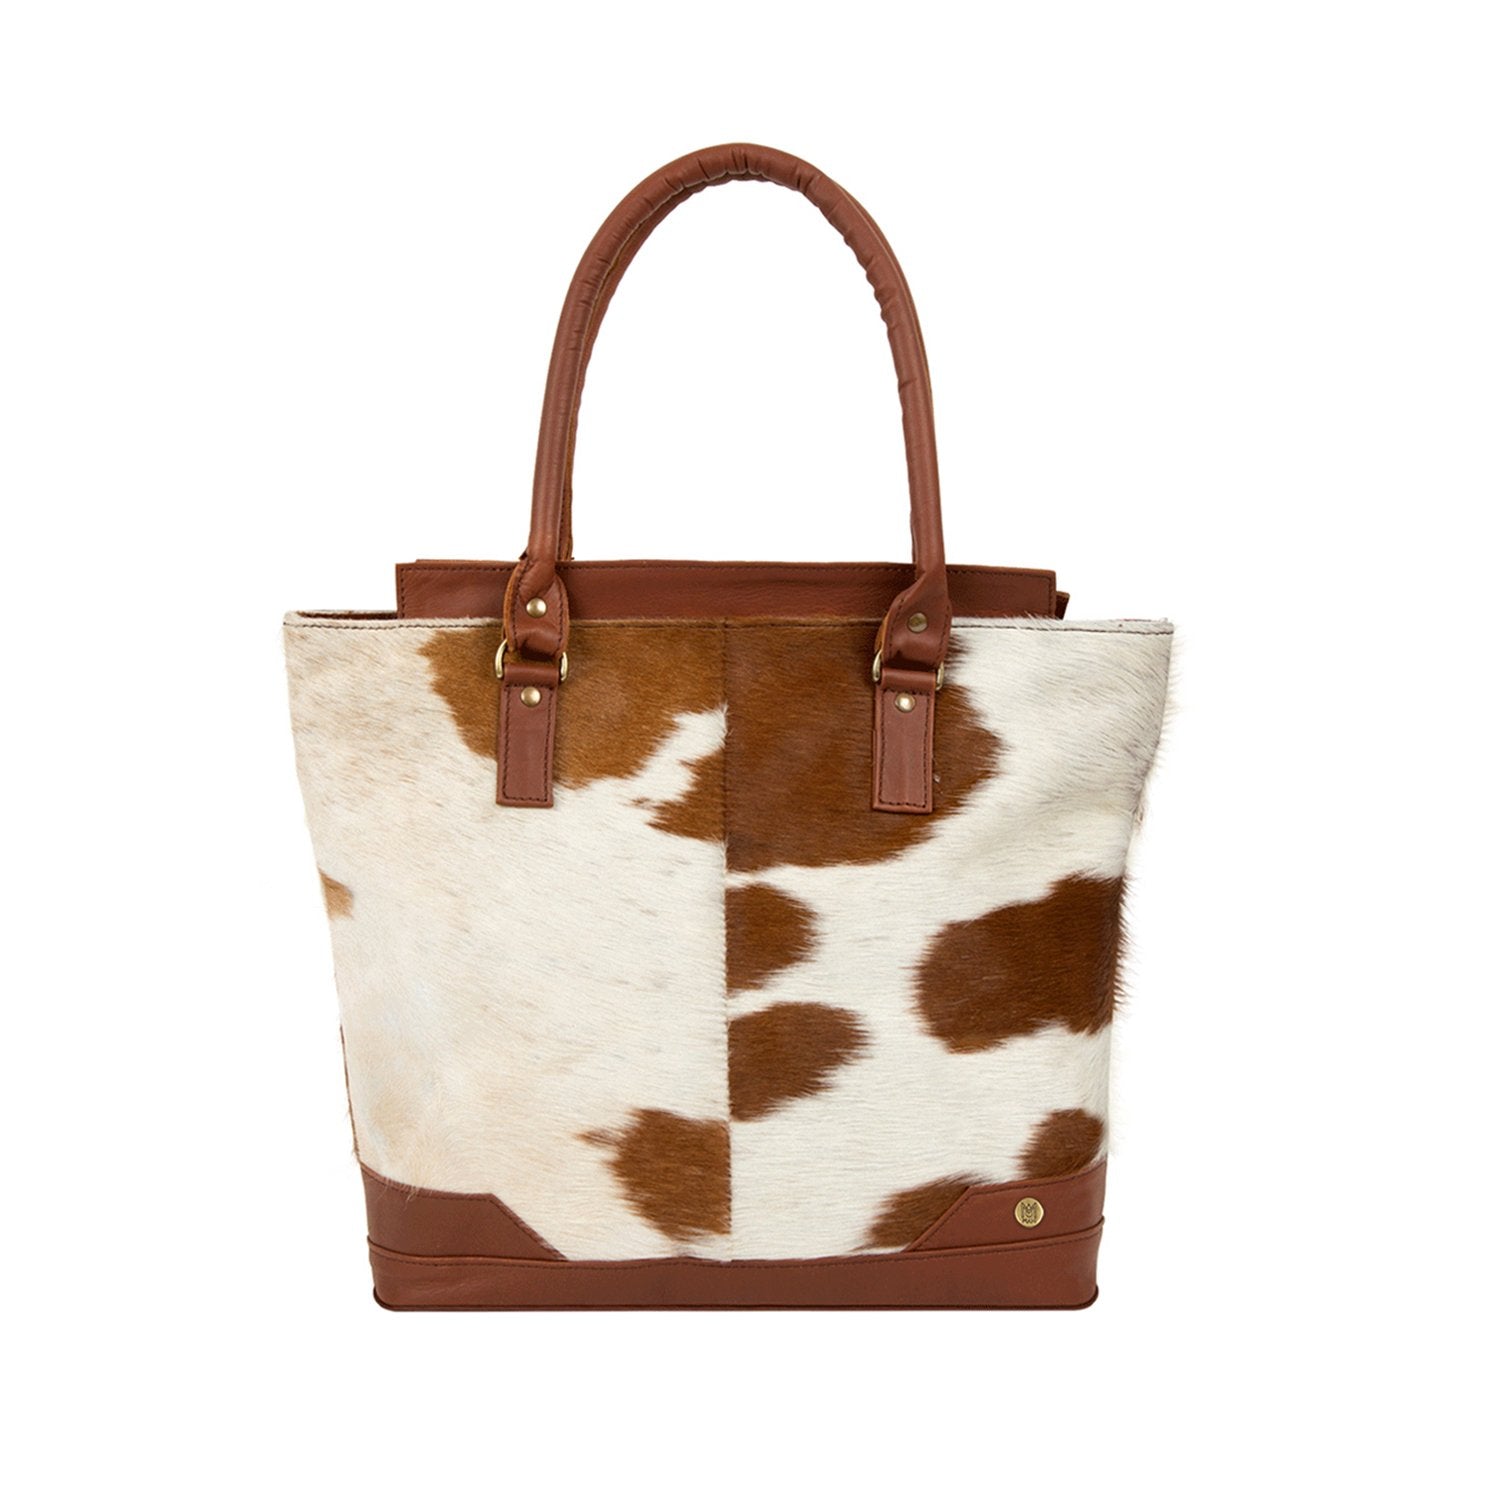 Clare V. Ponyhair Leather-Trimmed Tote - Brown Totes, Handbags - W2437353